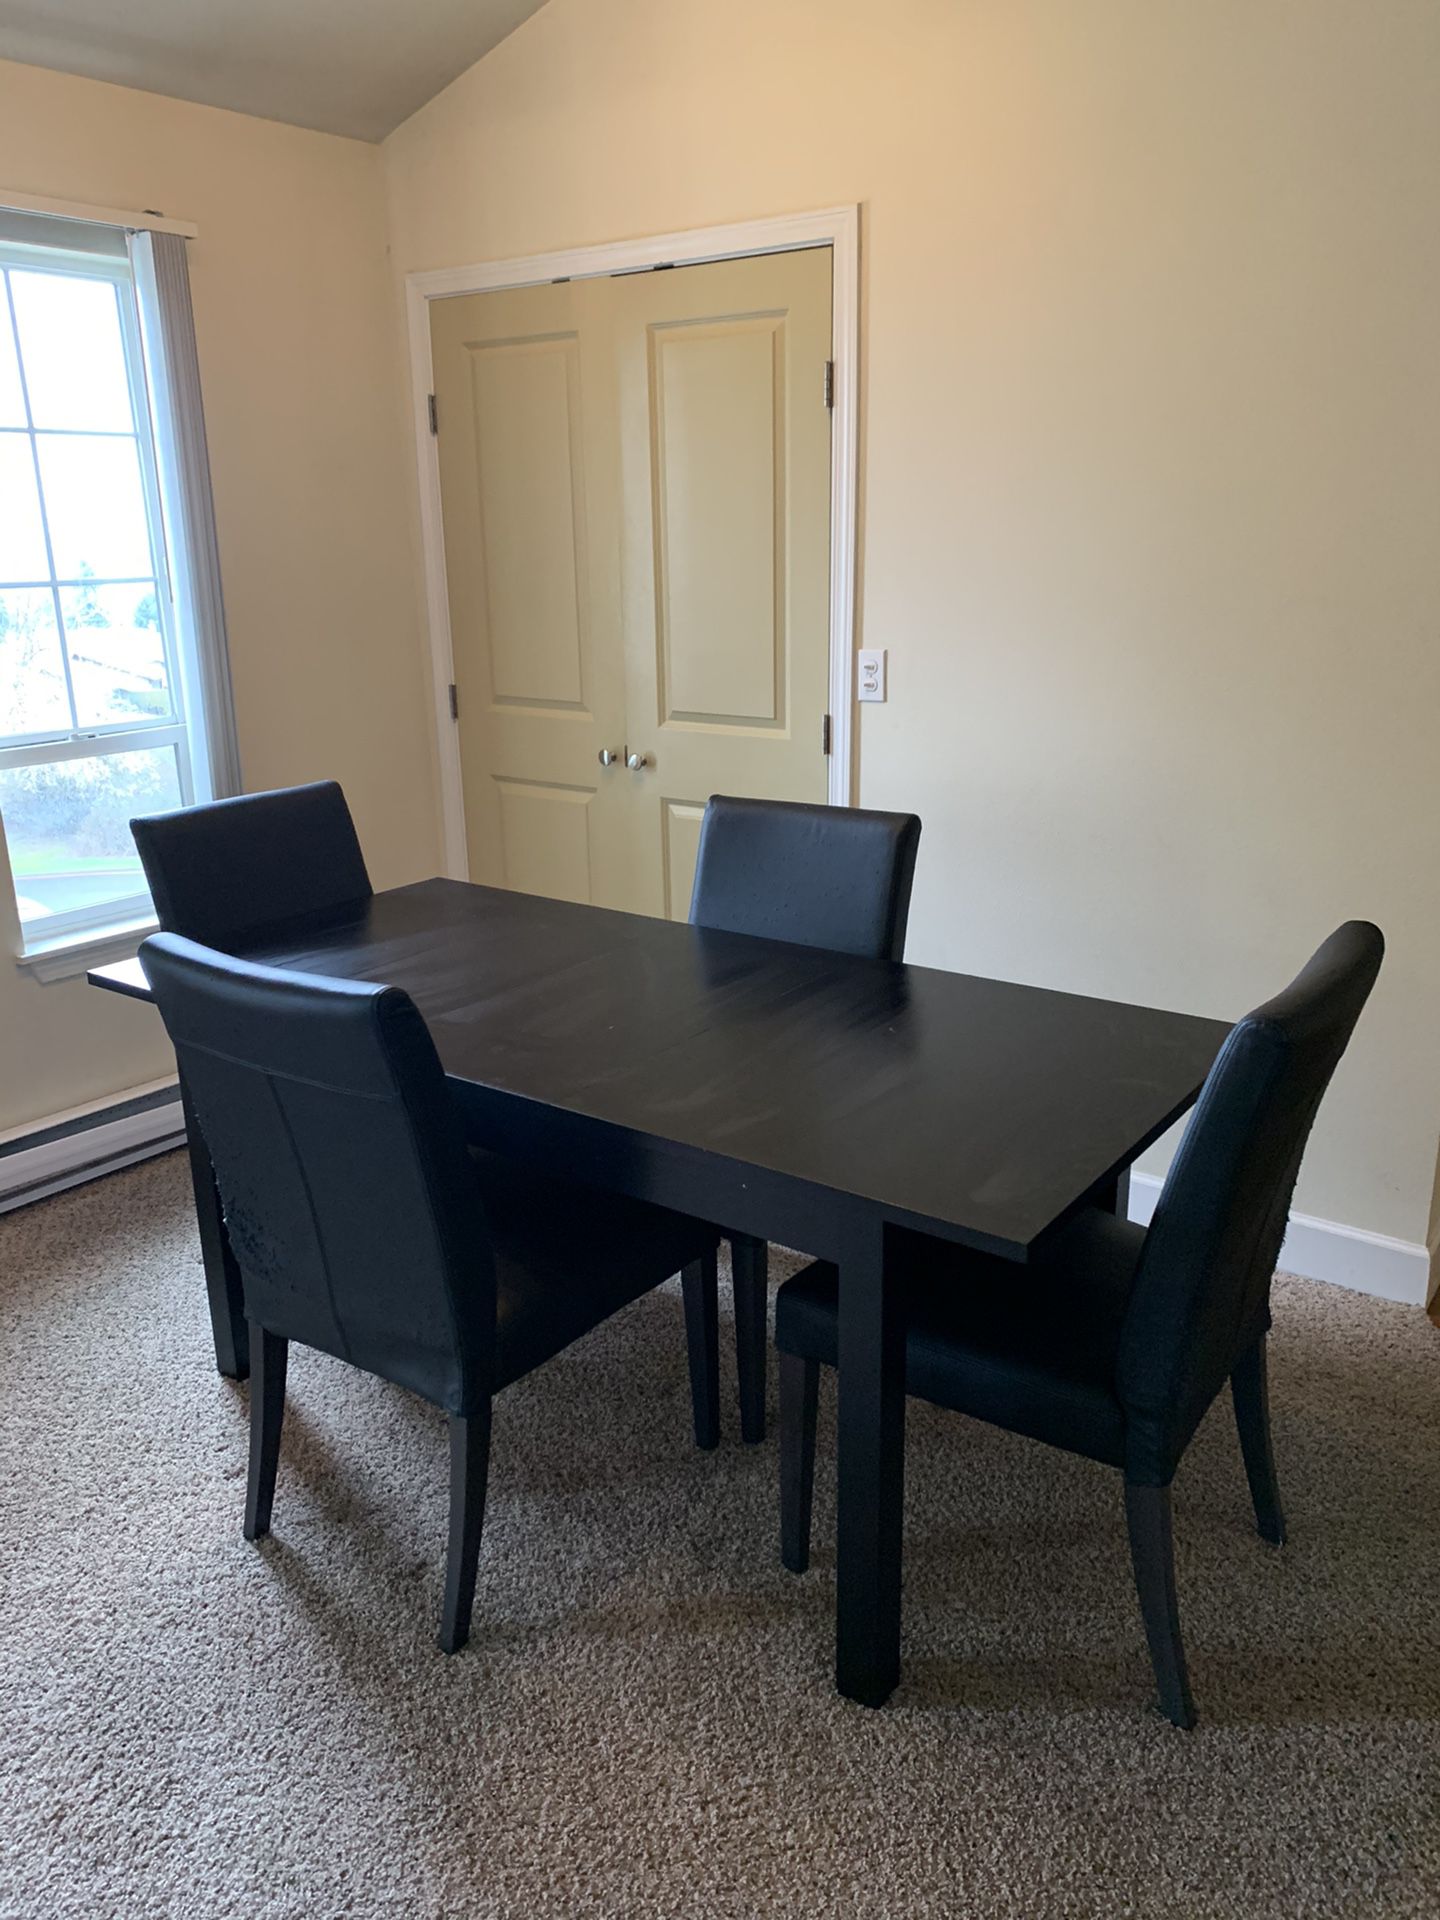 IKEA Black Wood Extendable Dining Table with Chairs